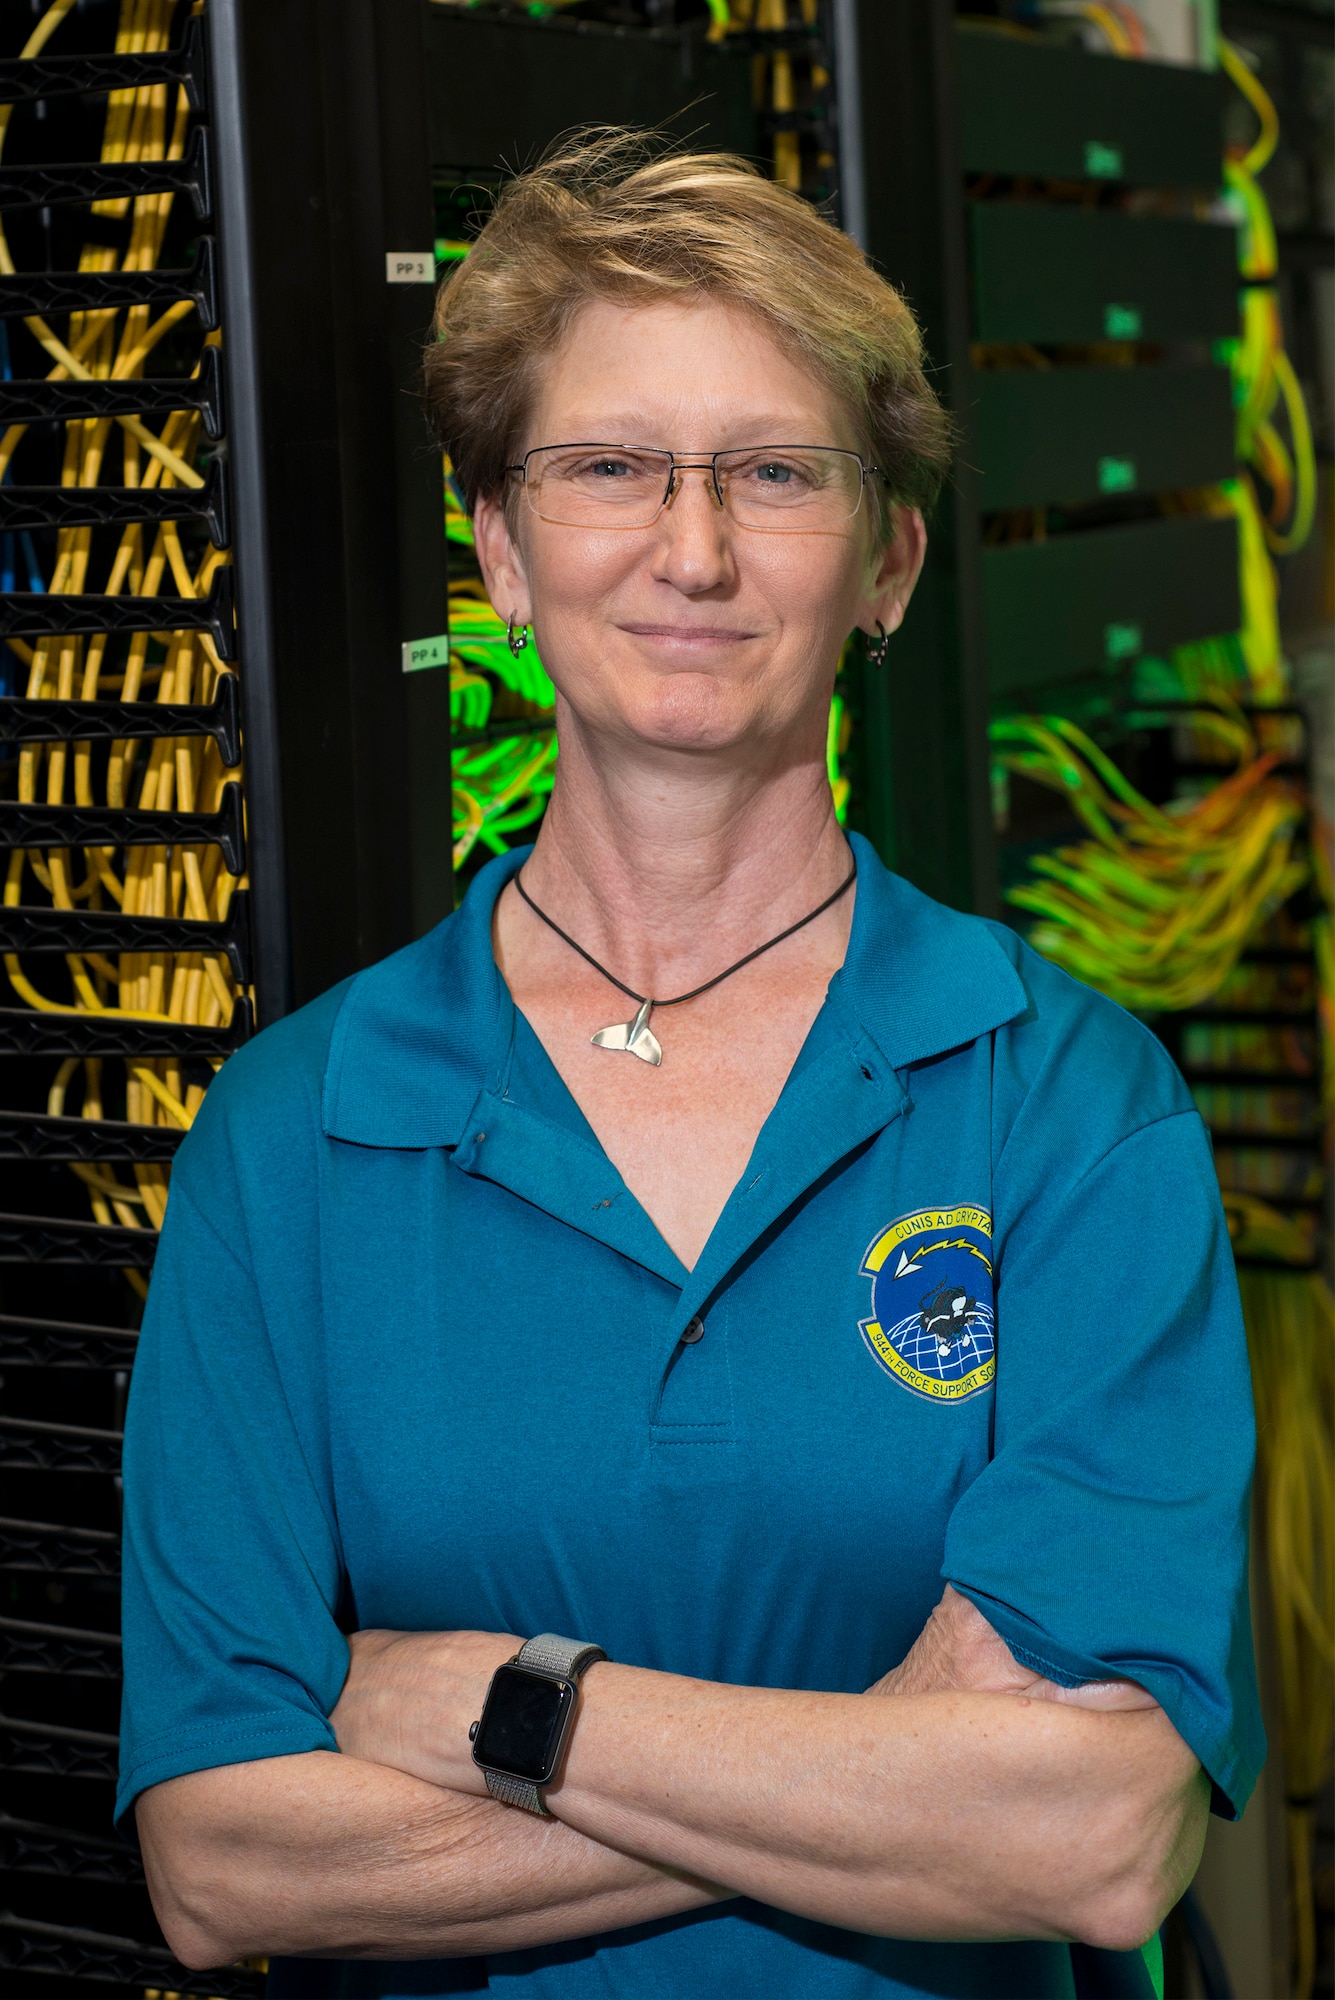 Fran Kramer, former 944th Fighter Wing network administrator, poses for a photo, April 12. Kramer served as the wing's first and main network administrator for the past 21 years.